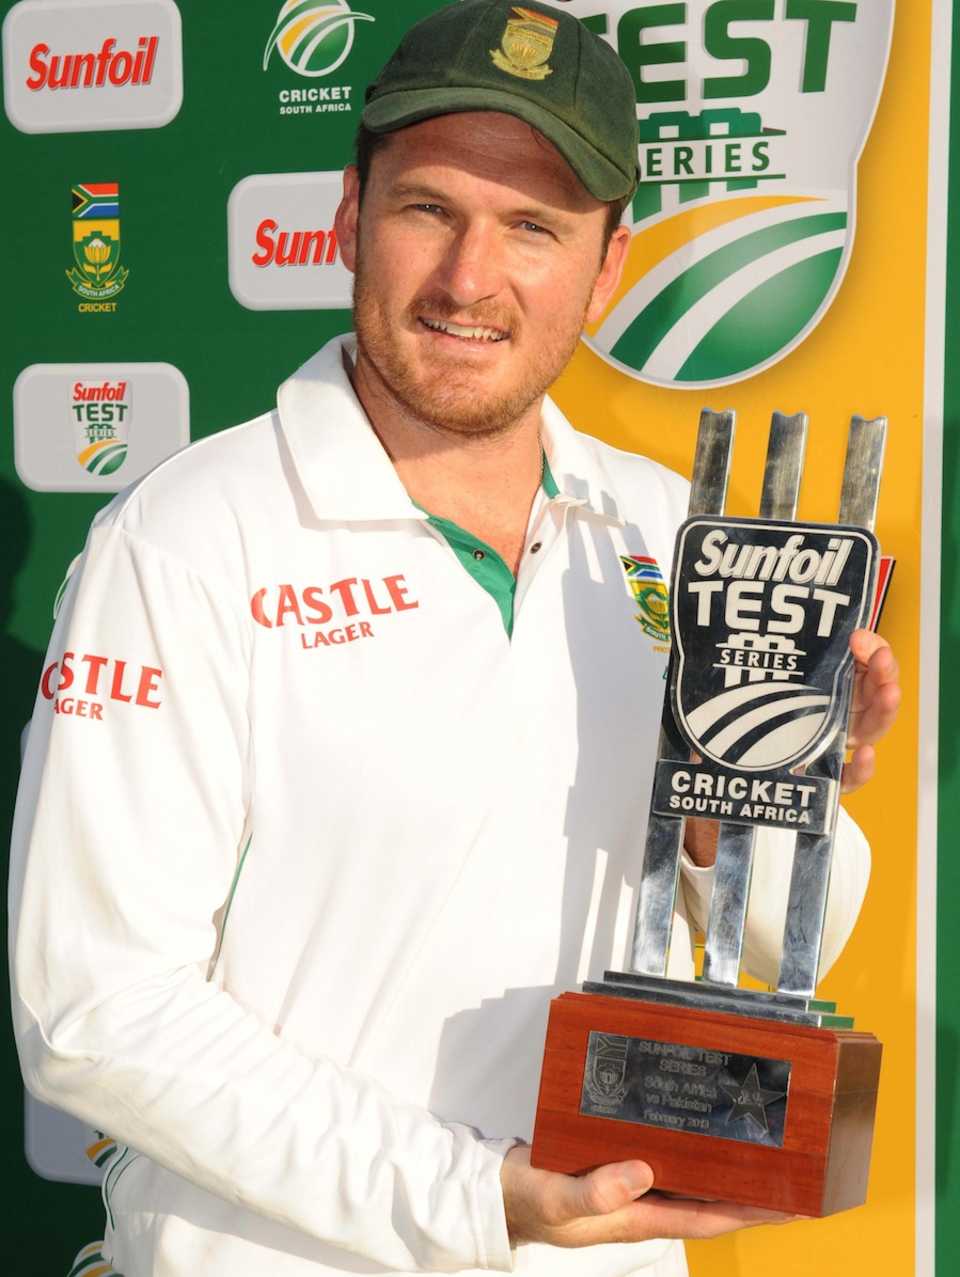 Graeme Smith with the winners trophy